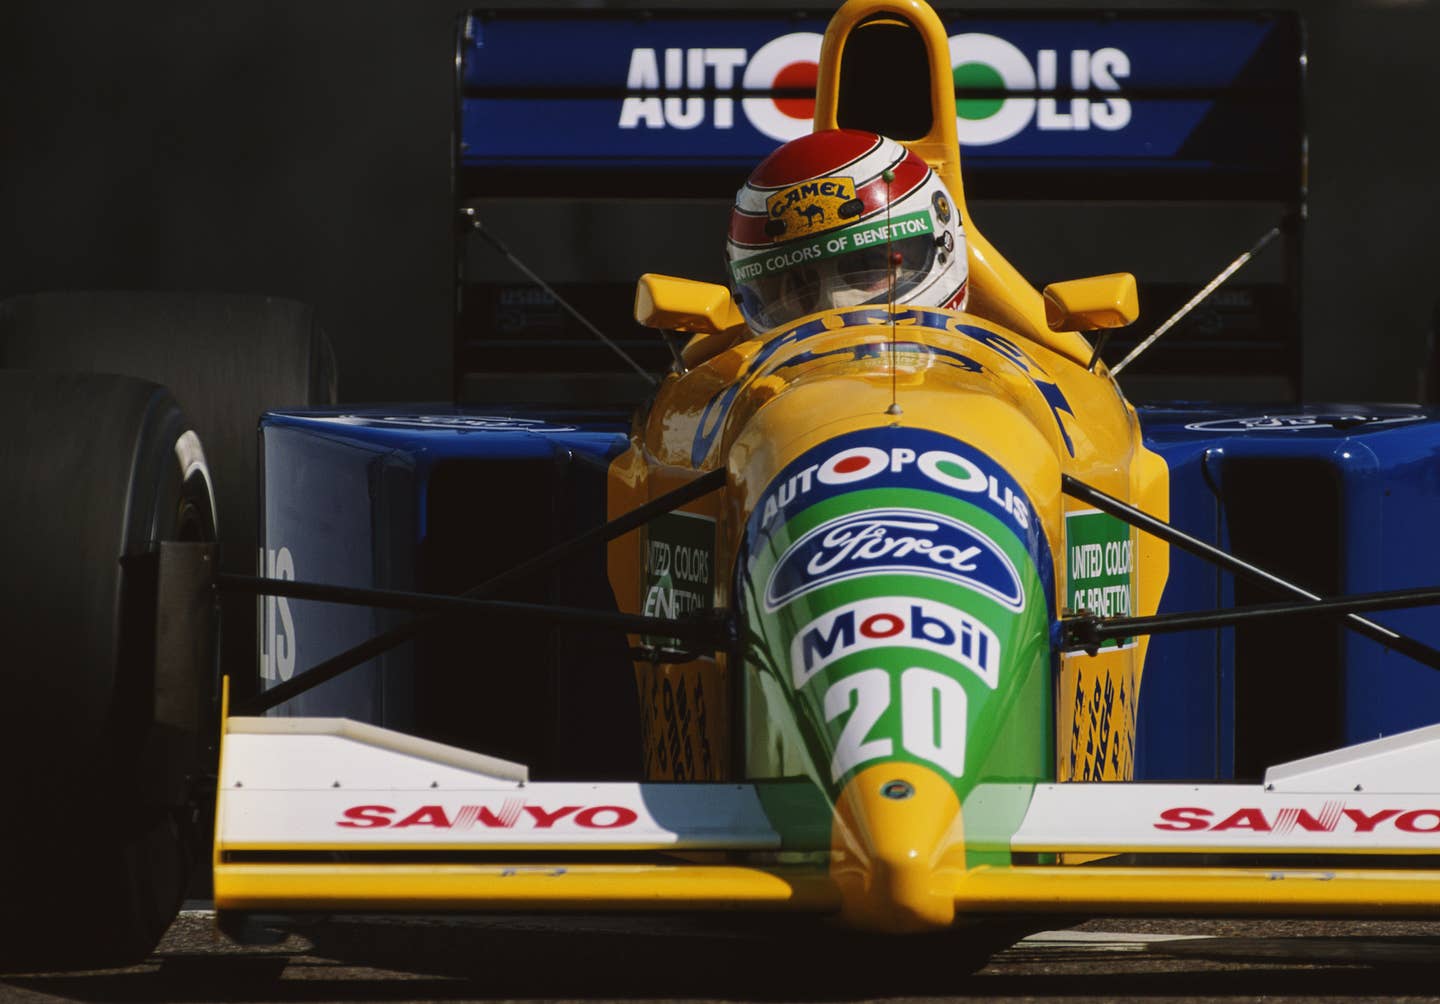 Nelson Piquet of Brazil drives the #20 Camel Benetton Ford Benetton B190B Ford V8 during the Iceberg United States Grand Prix on 10th March 1991 at the Phoenix street course in Phoenix, Arizona, United States. (Photo by Pascal Rondeau/Getty Images)